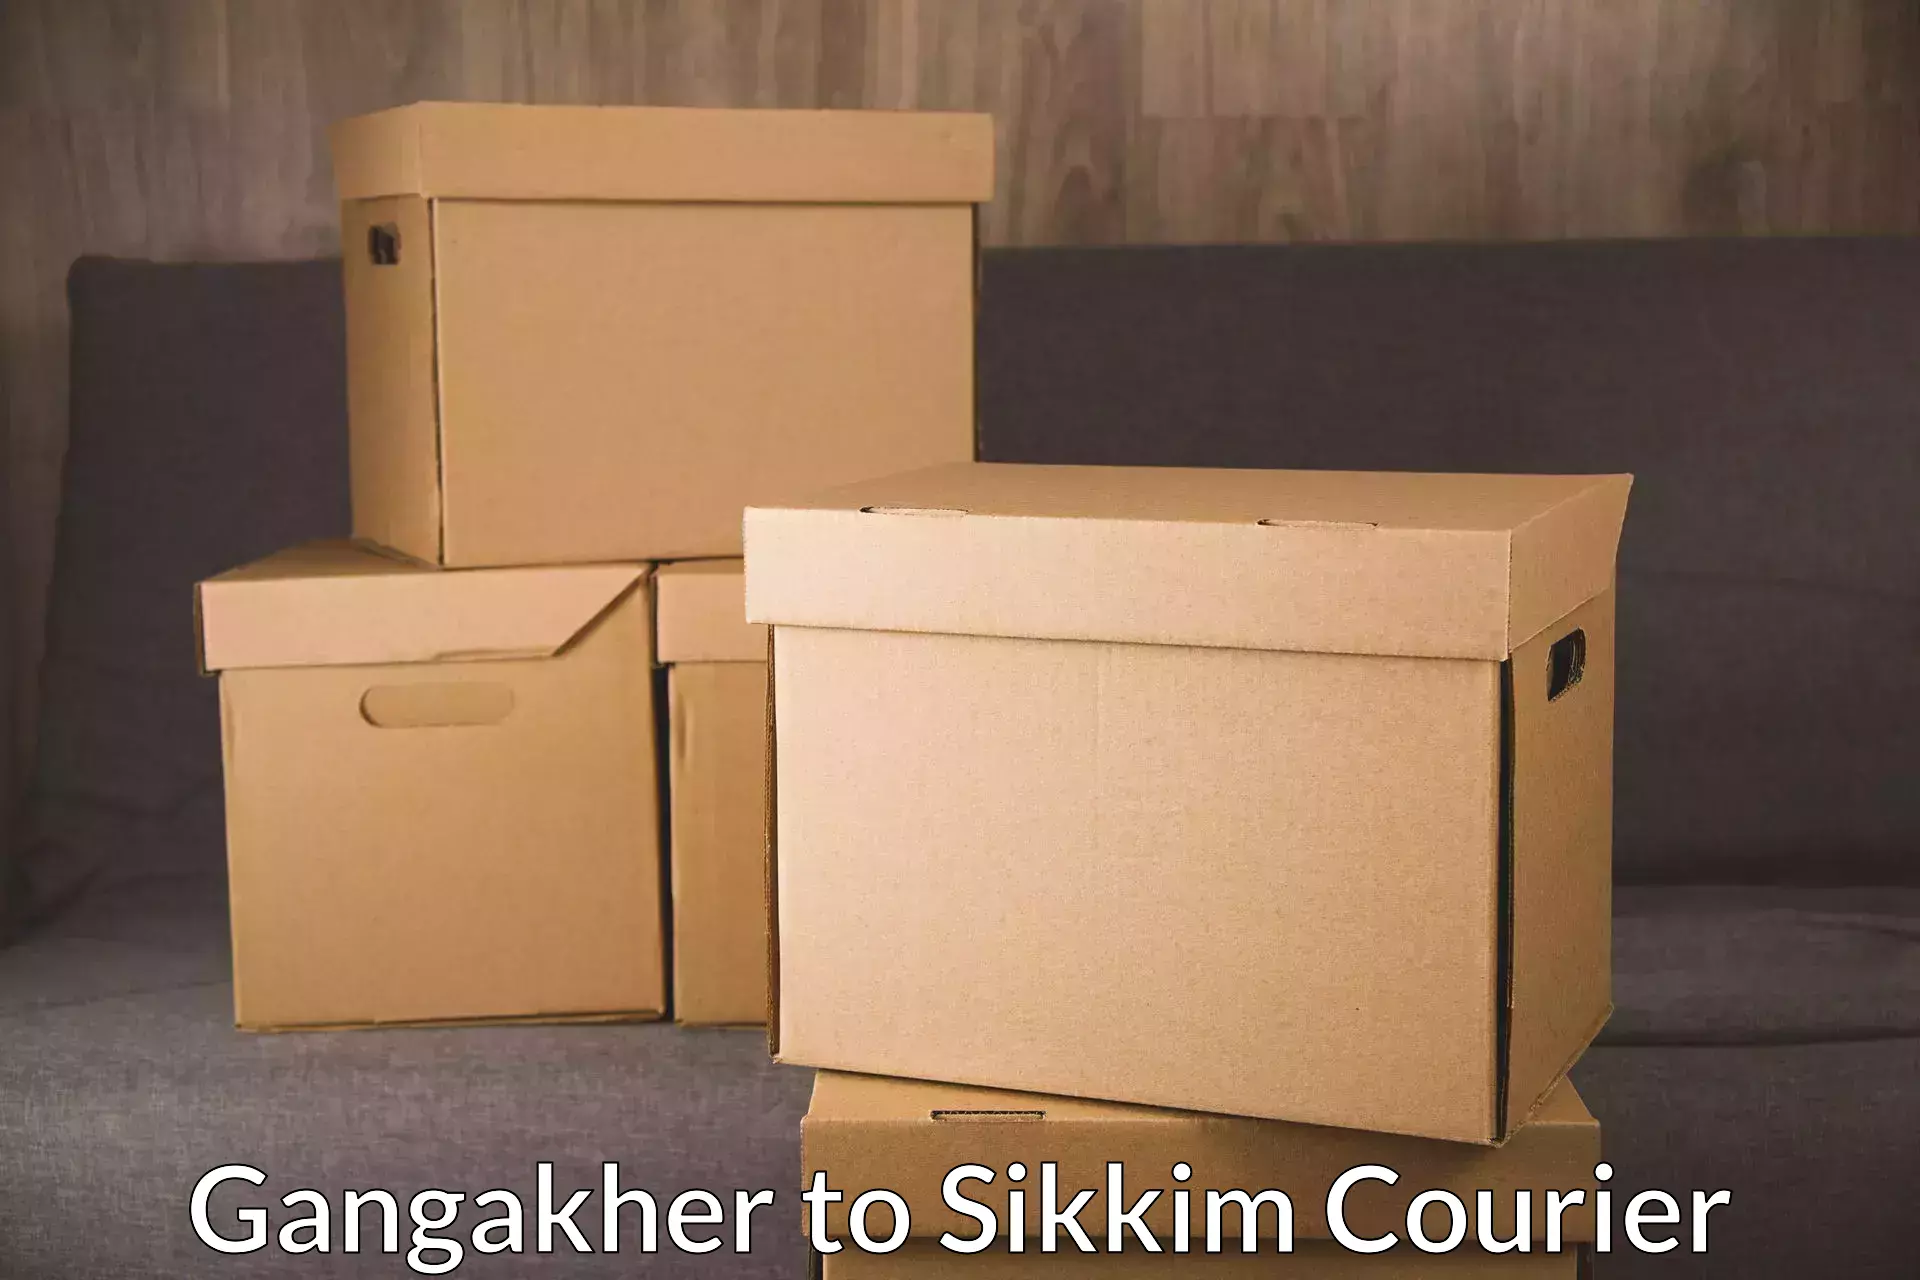 State-of-the-art courier technology Gangakher to West Sikkim